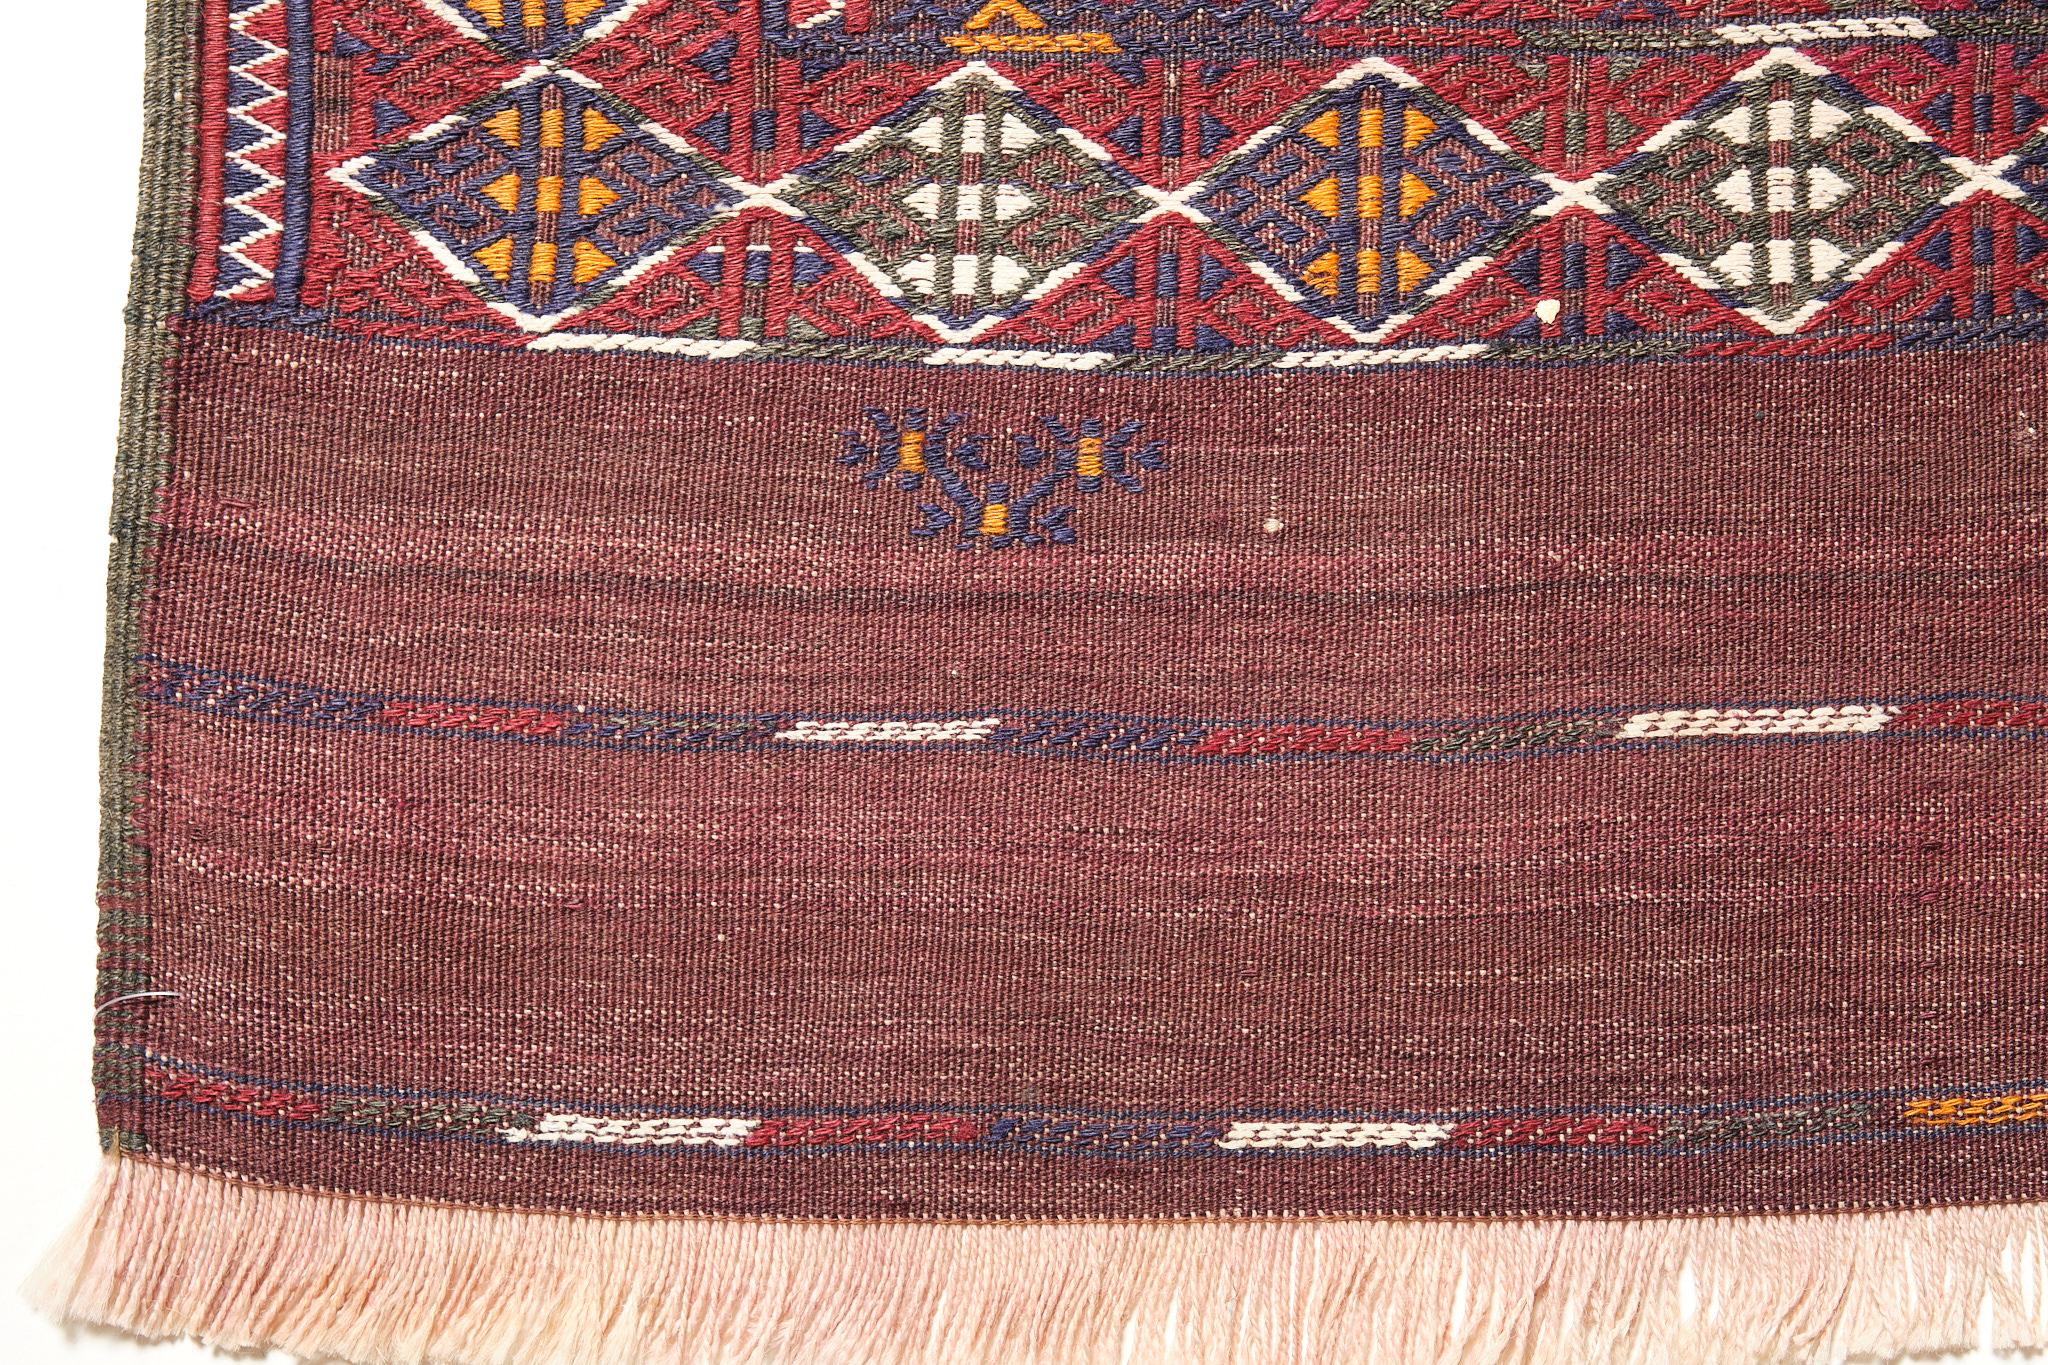 This is a Central Asian Old Yomut Kilim from the West Turkestan and Iran region with a rare and beautiful color composition.

The Yomut are to be found in north-east Iran, and across the border in west Turkestan close to the Caspian Sea. There is